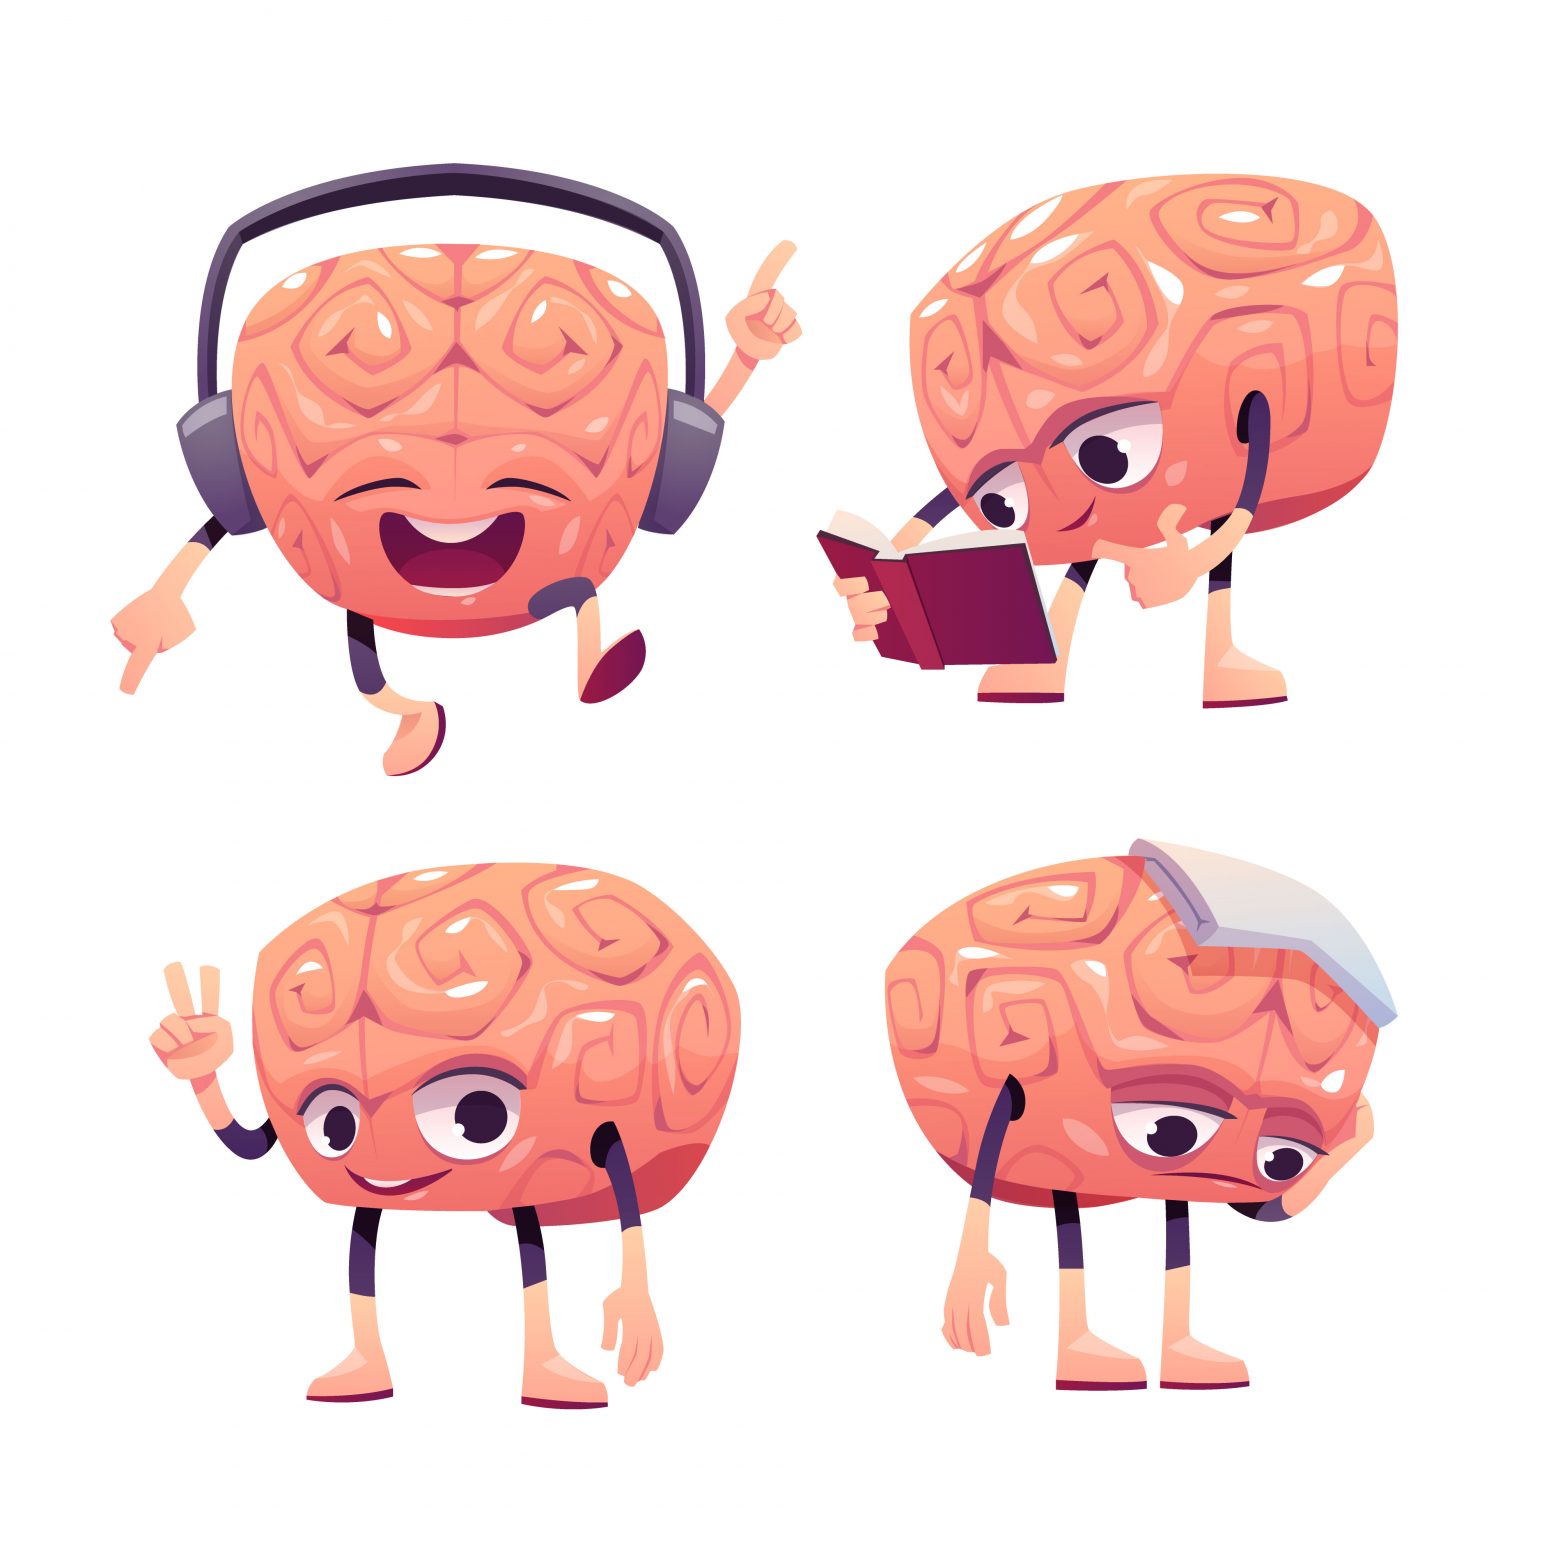 How classical music affects the brain